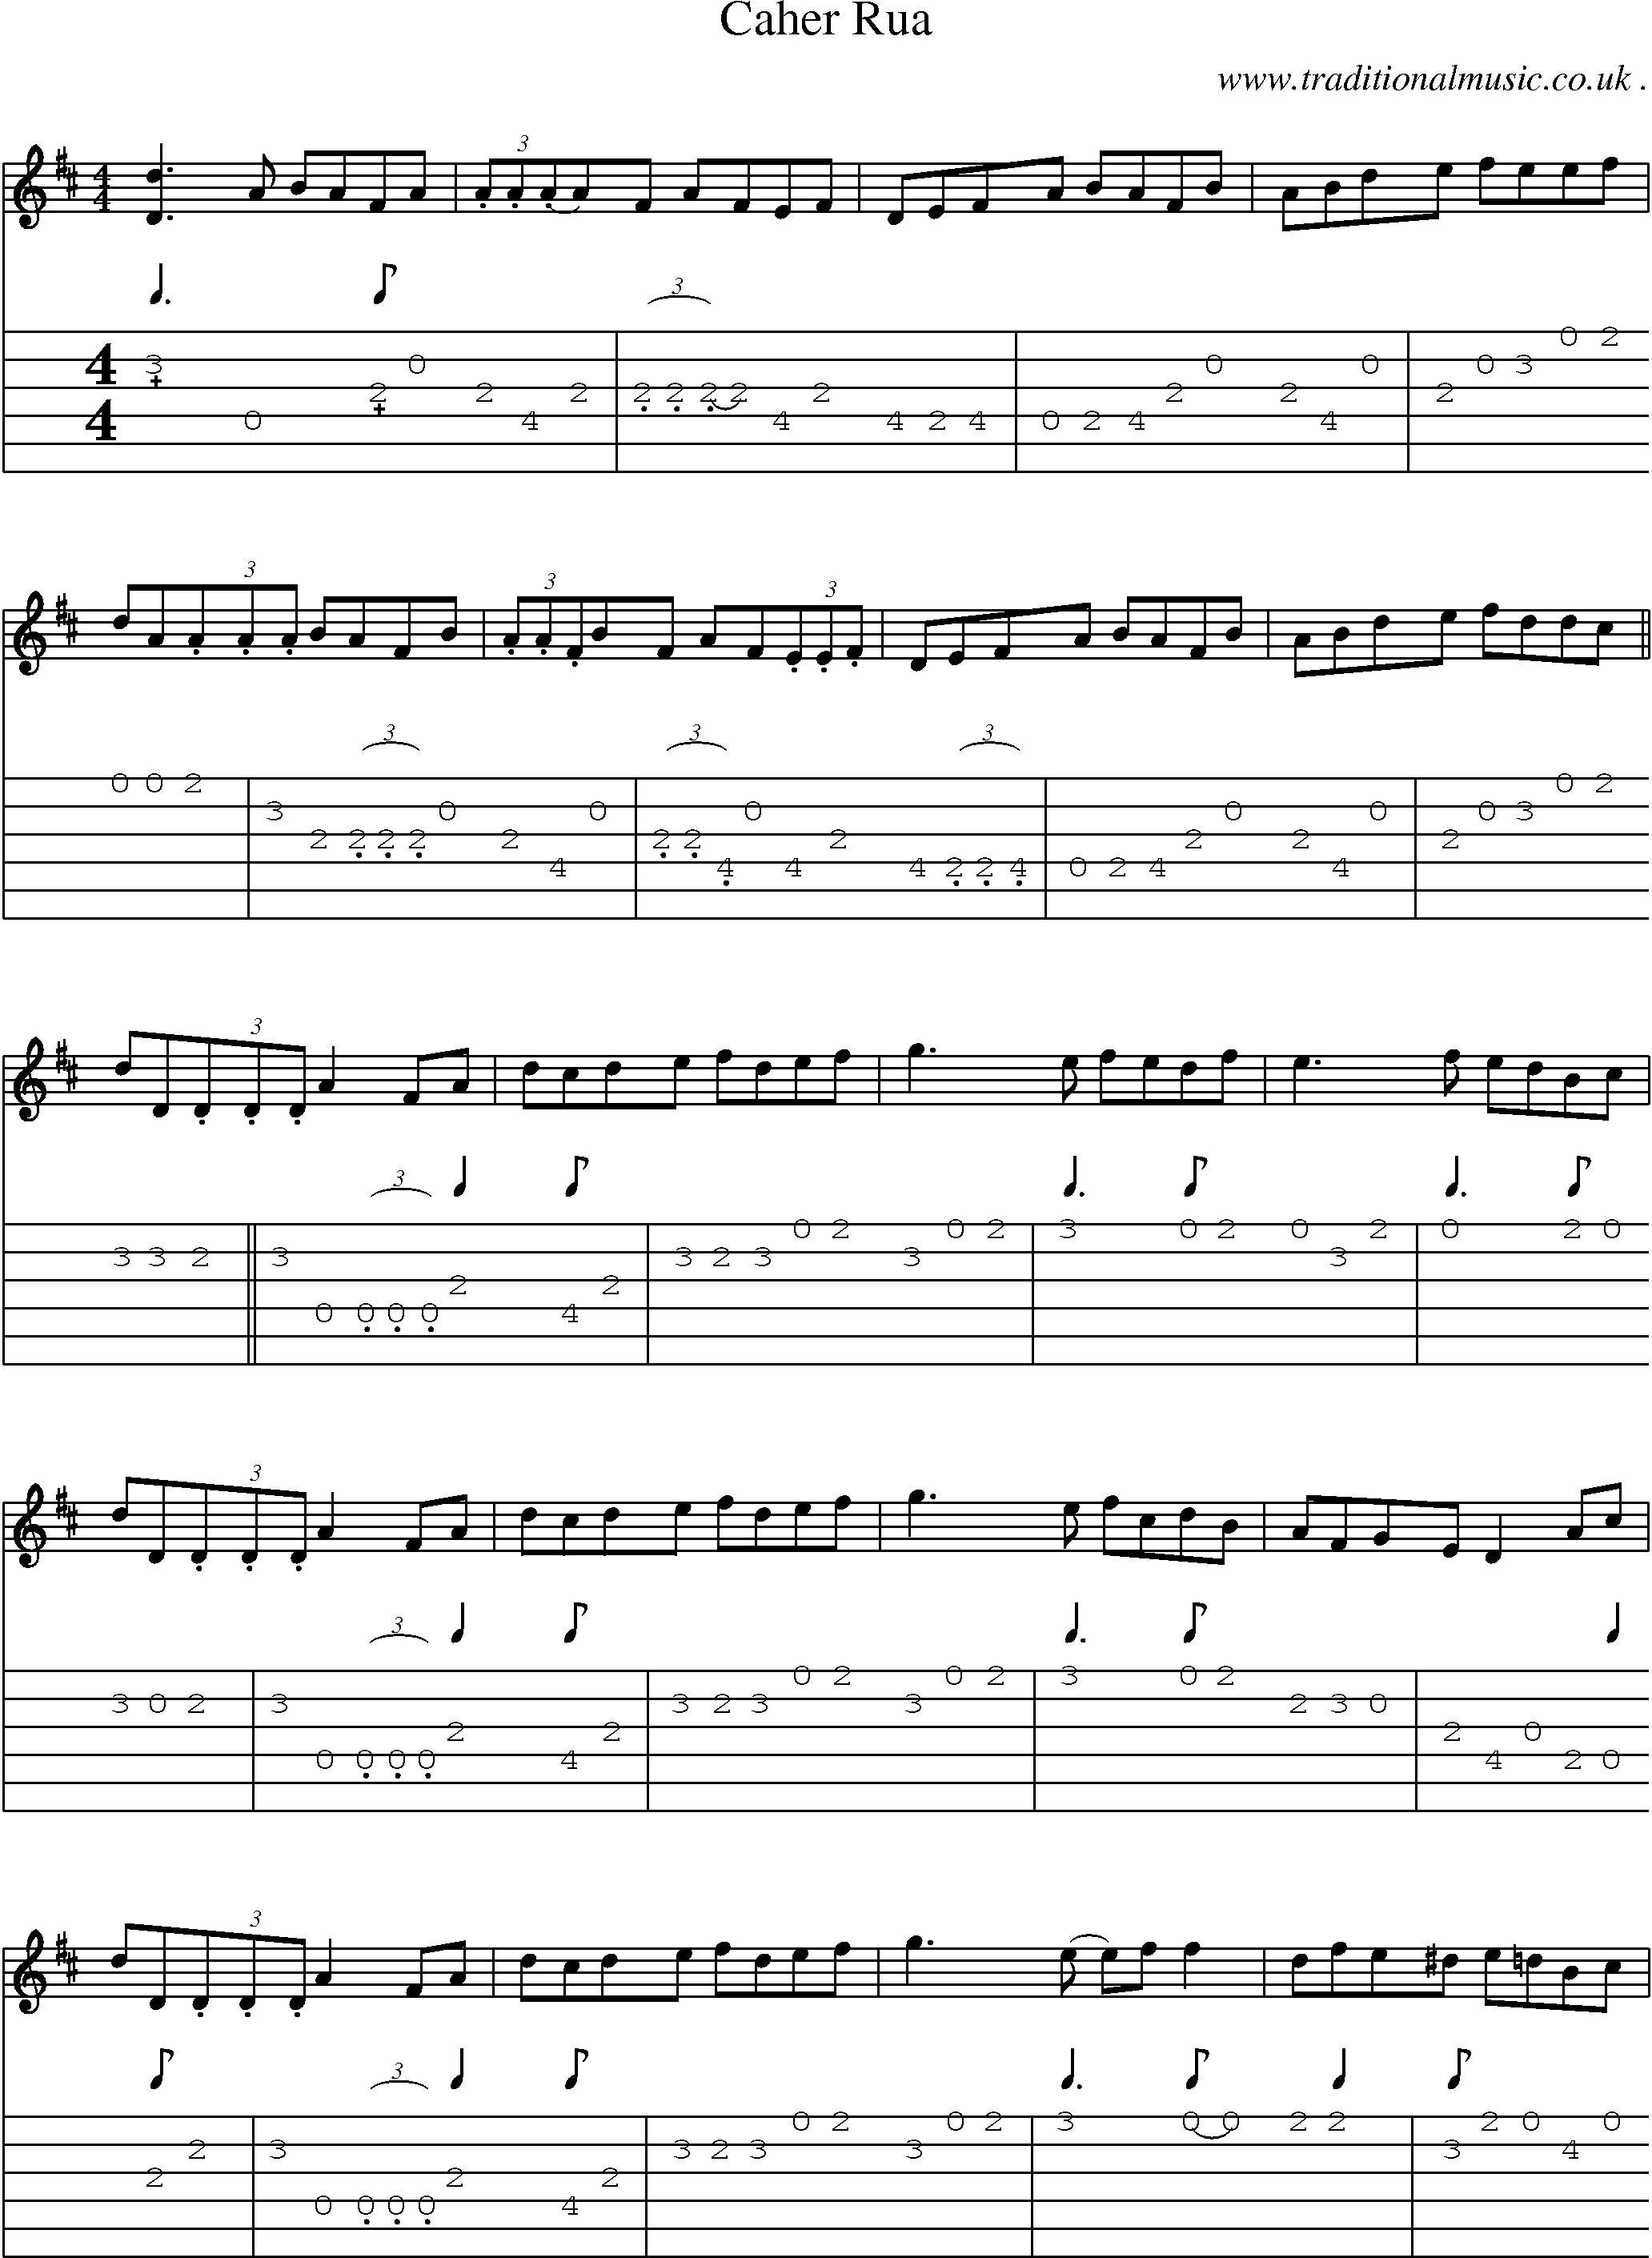 Sheet-Music and Guitar Tabs for Caher Rua